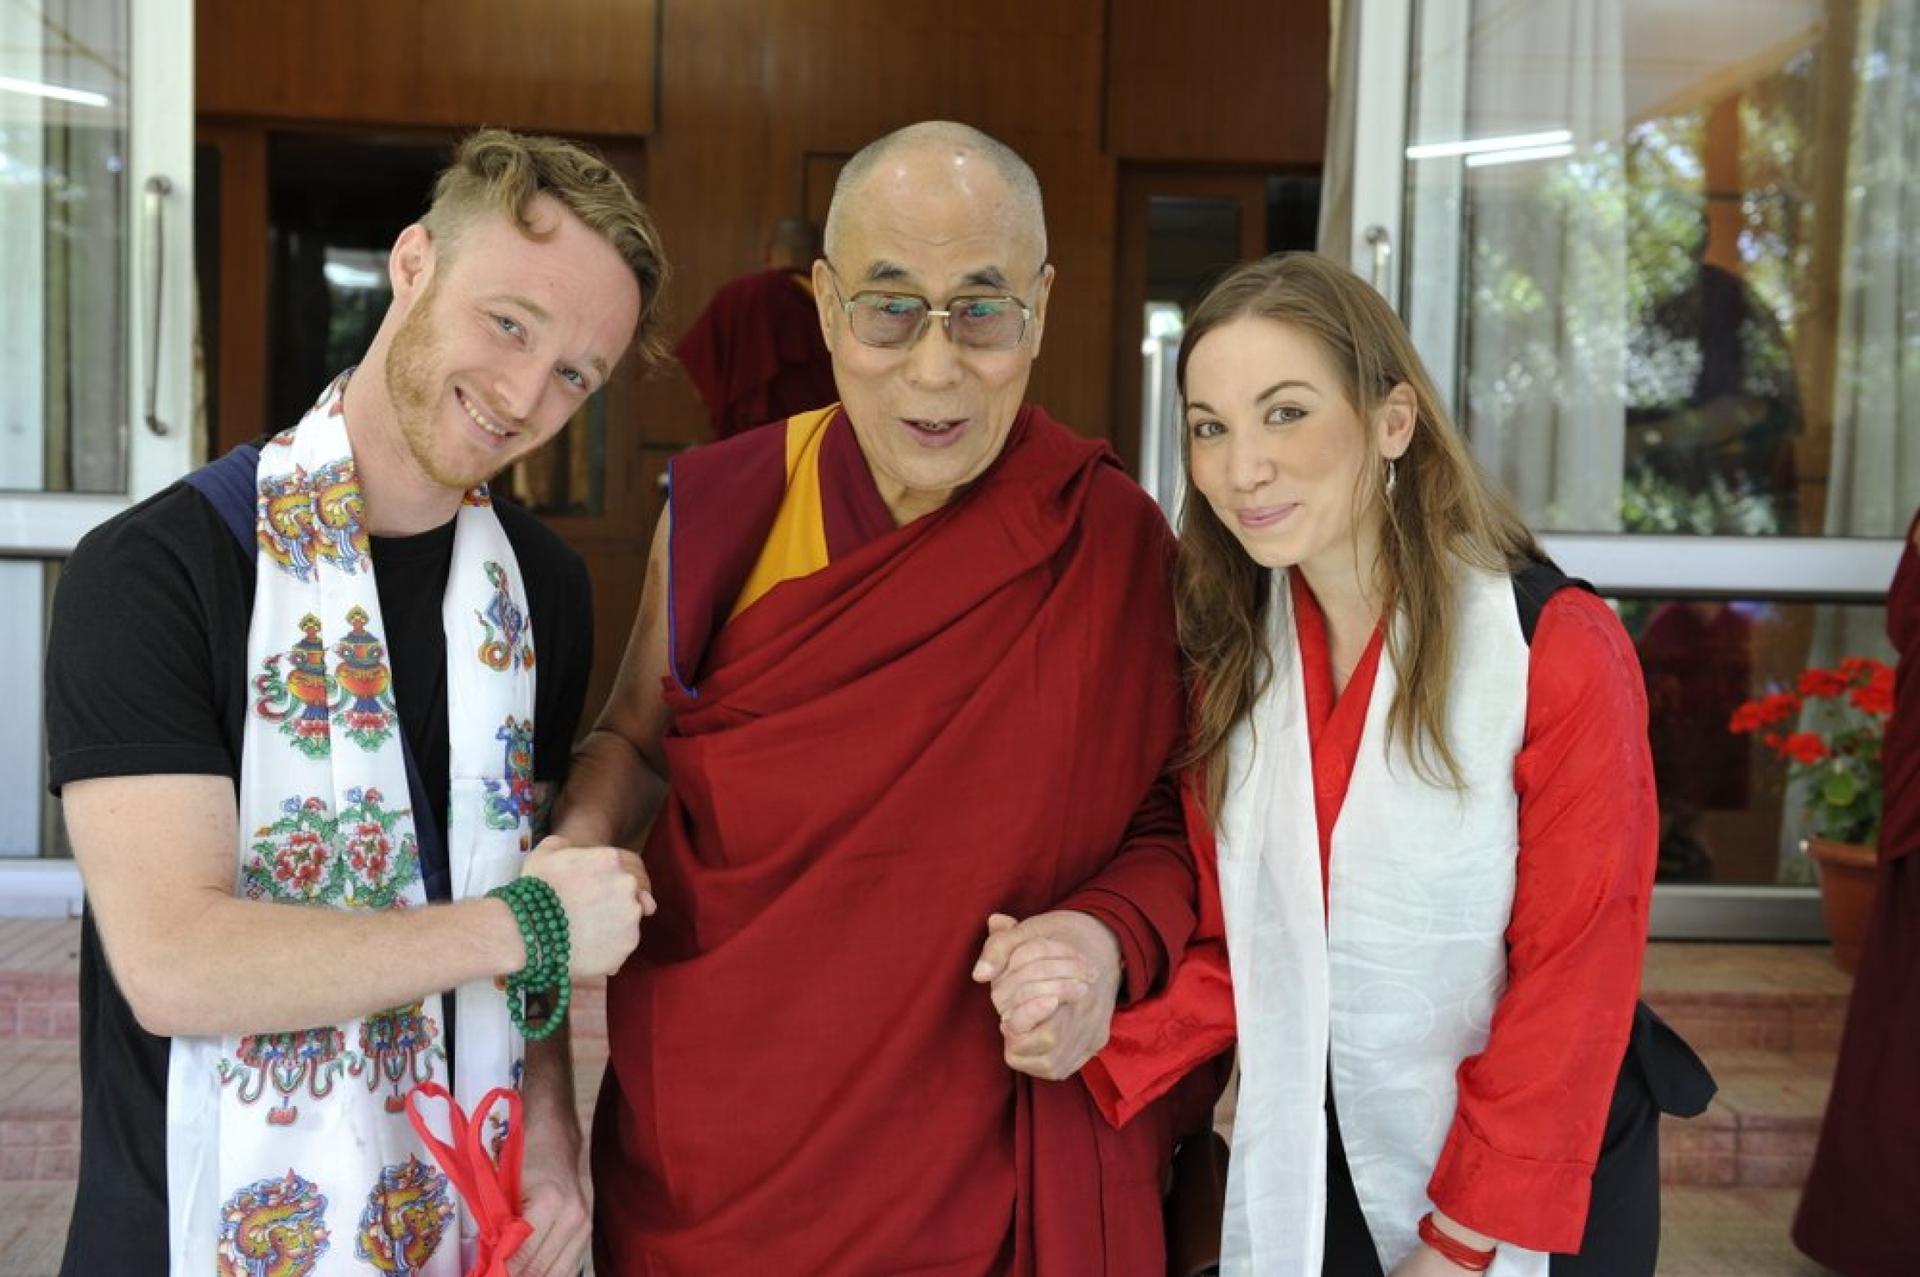 The Dalai Lama posses for a photo with a man and a woman. They are holding hands.